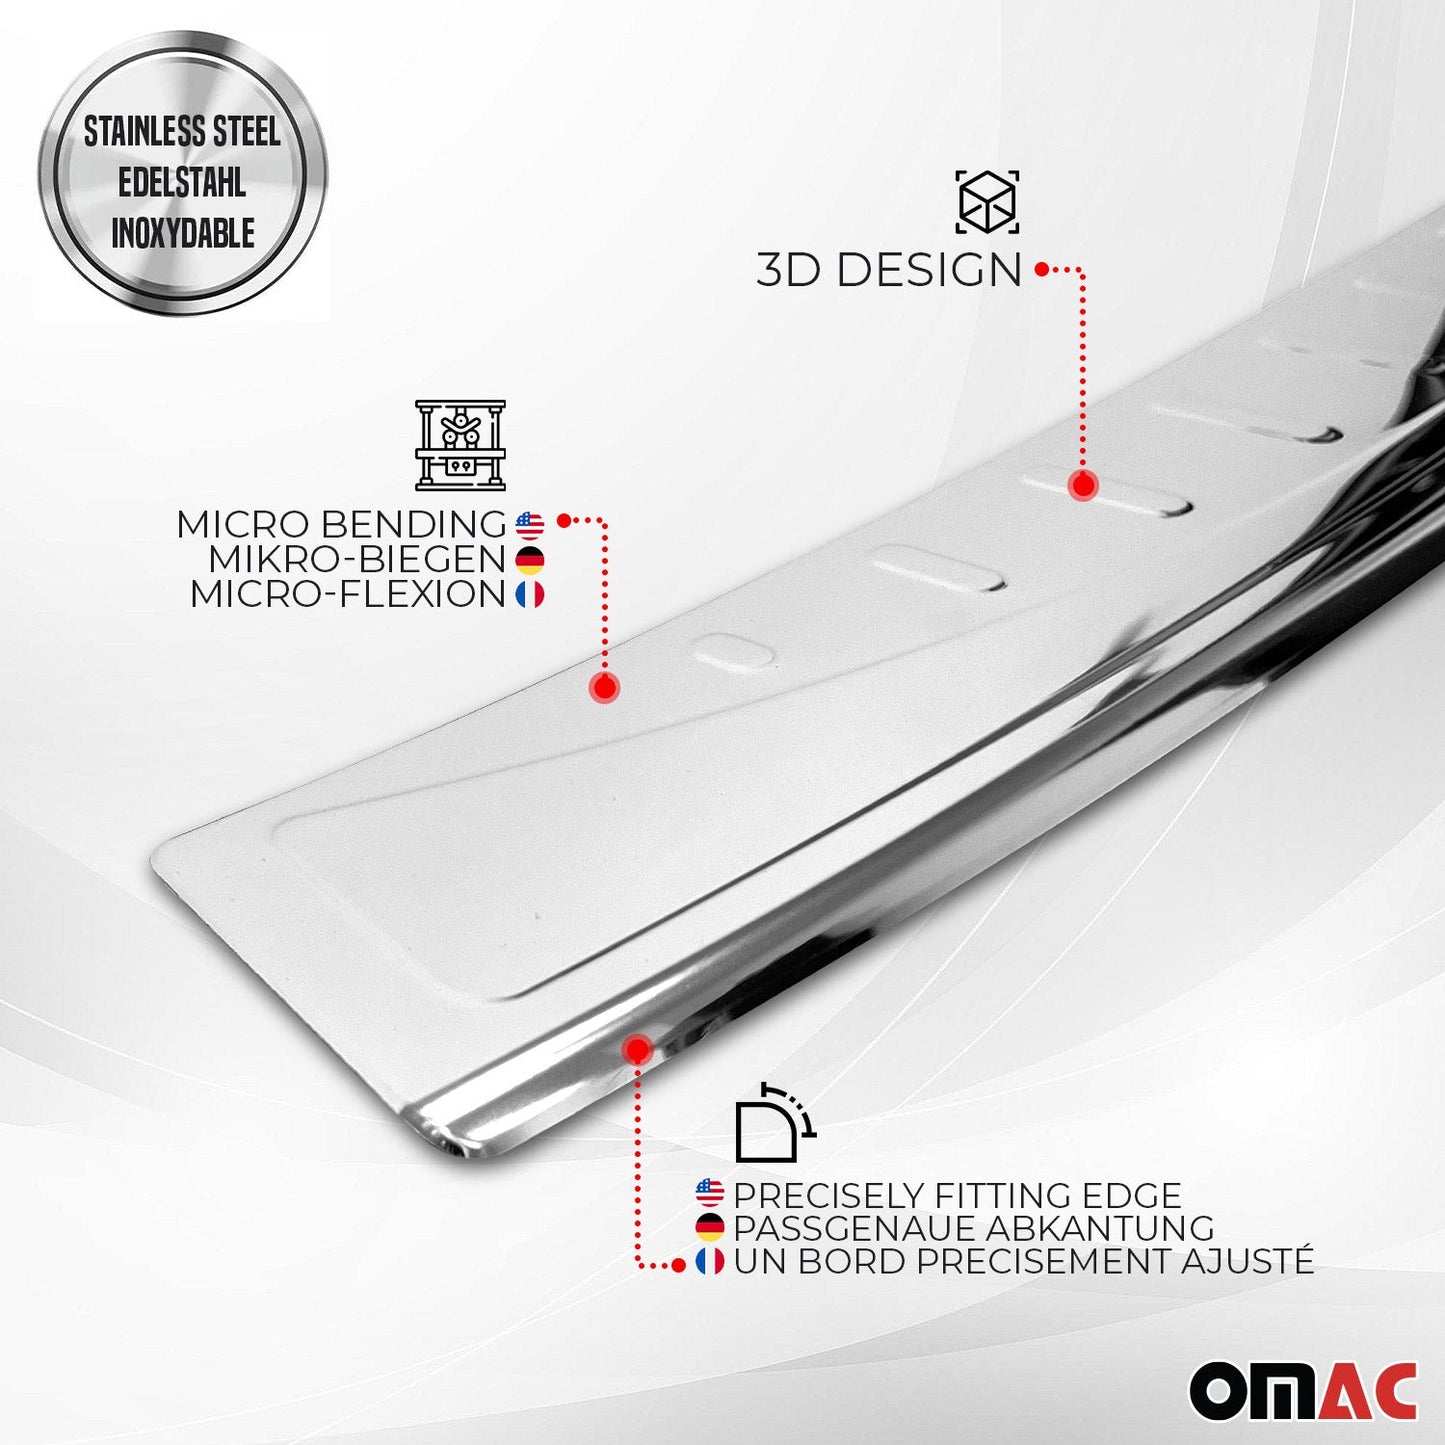 OMAC Chrome Rear Bumper Guard For Opel Astra J 2010-2015 Trunk Sill Protector S.Steel 5216095